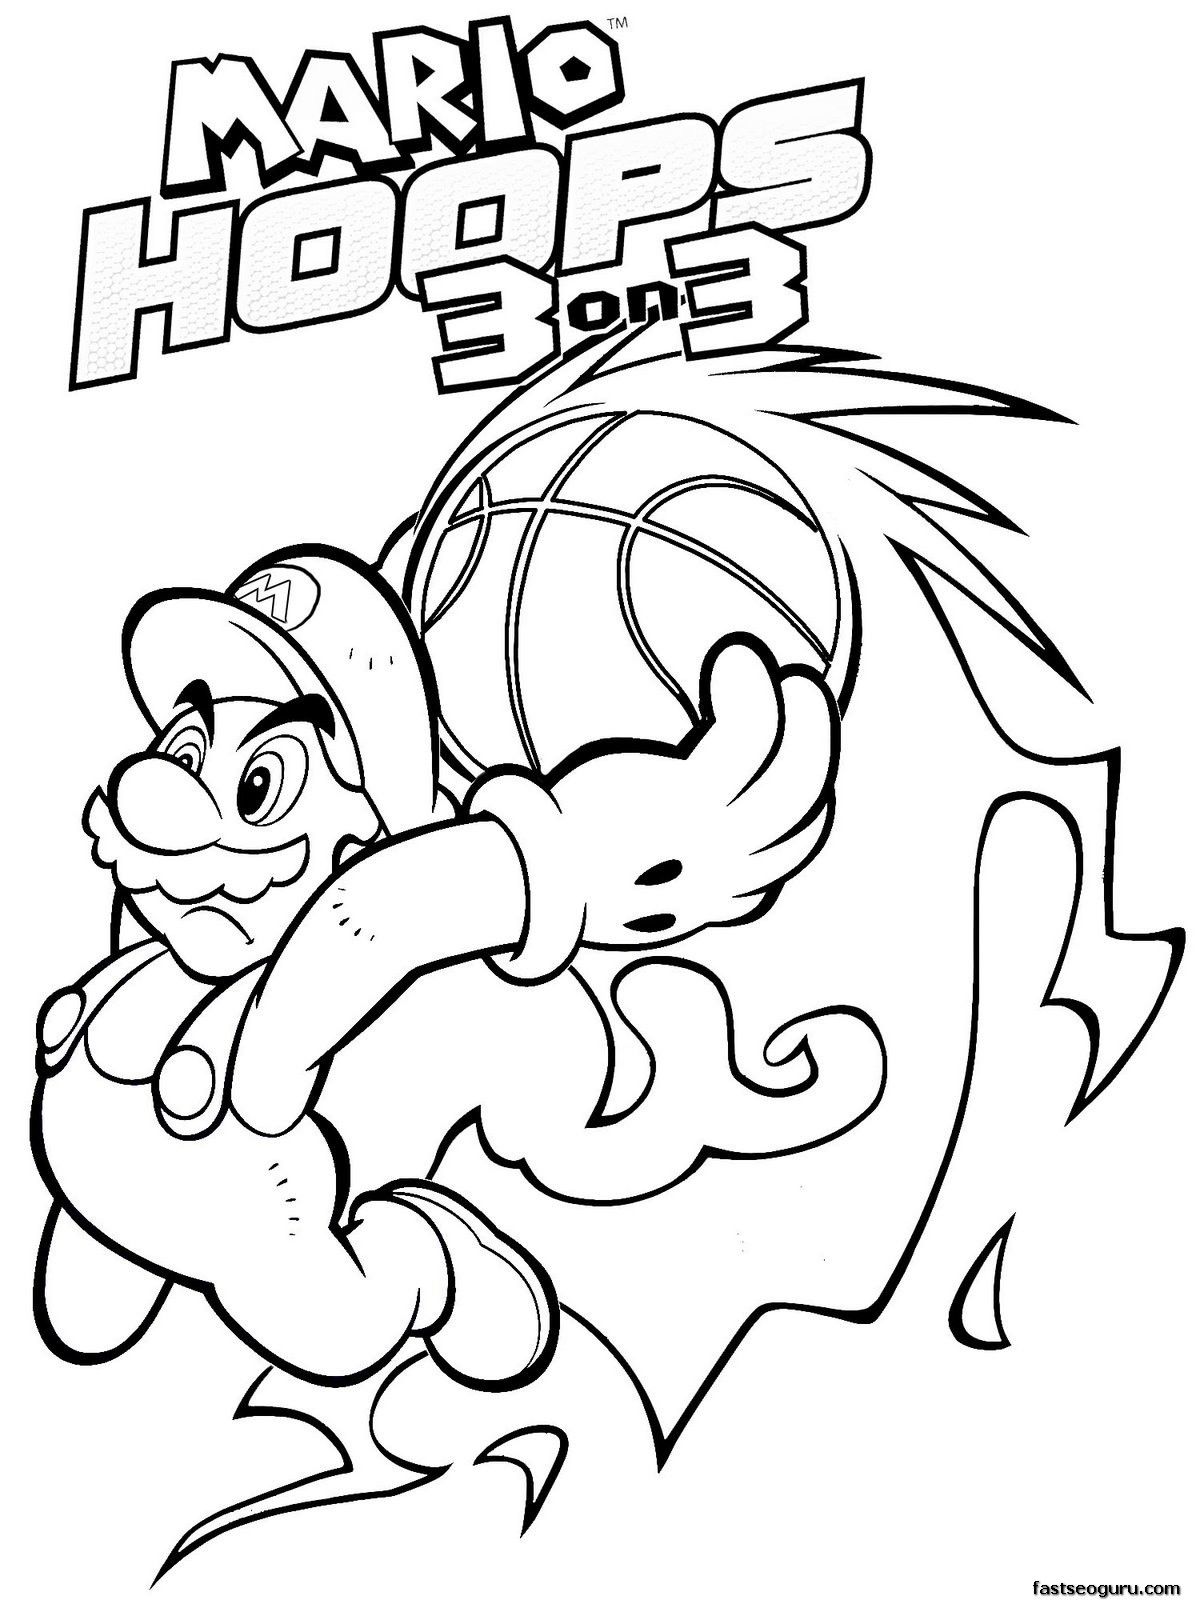 Super Mario World Coloring Pages - HiColoringPages